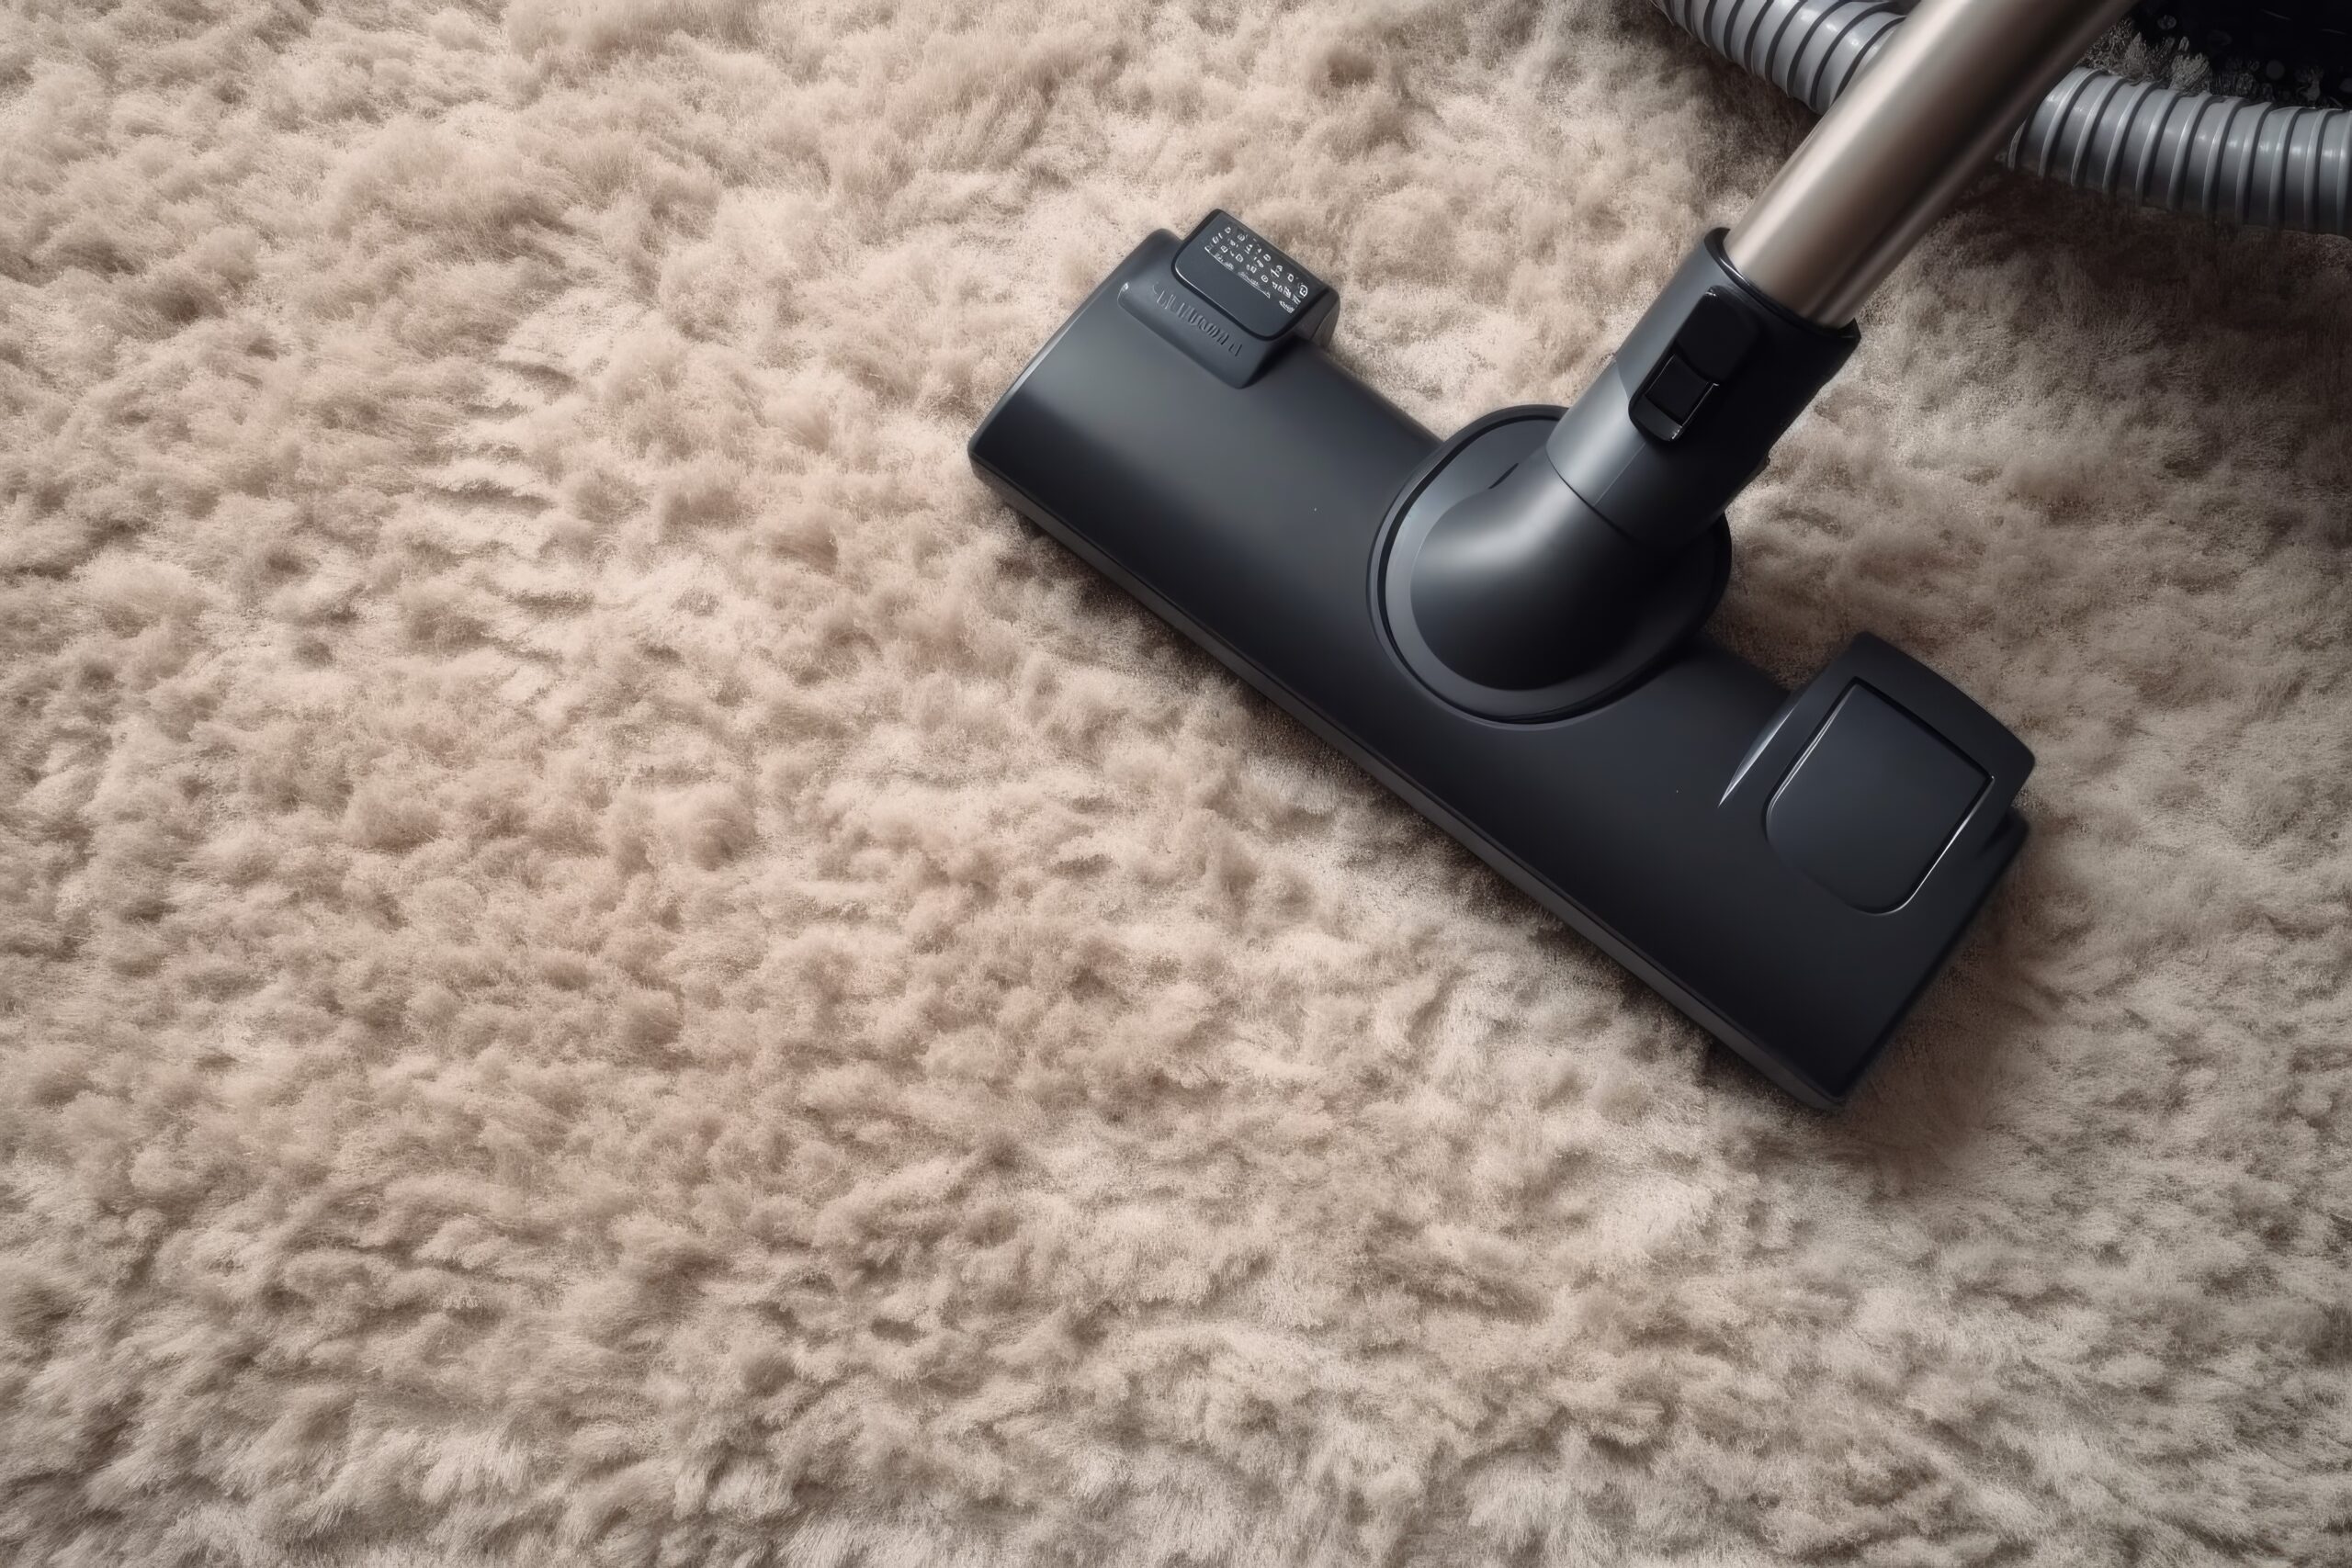 www.appr.com : How To Clean Vacuum Cleaner Filter?